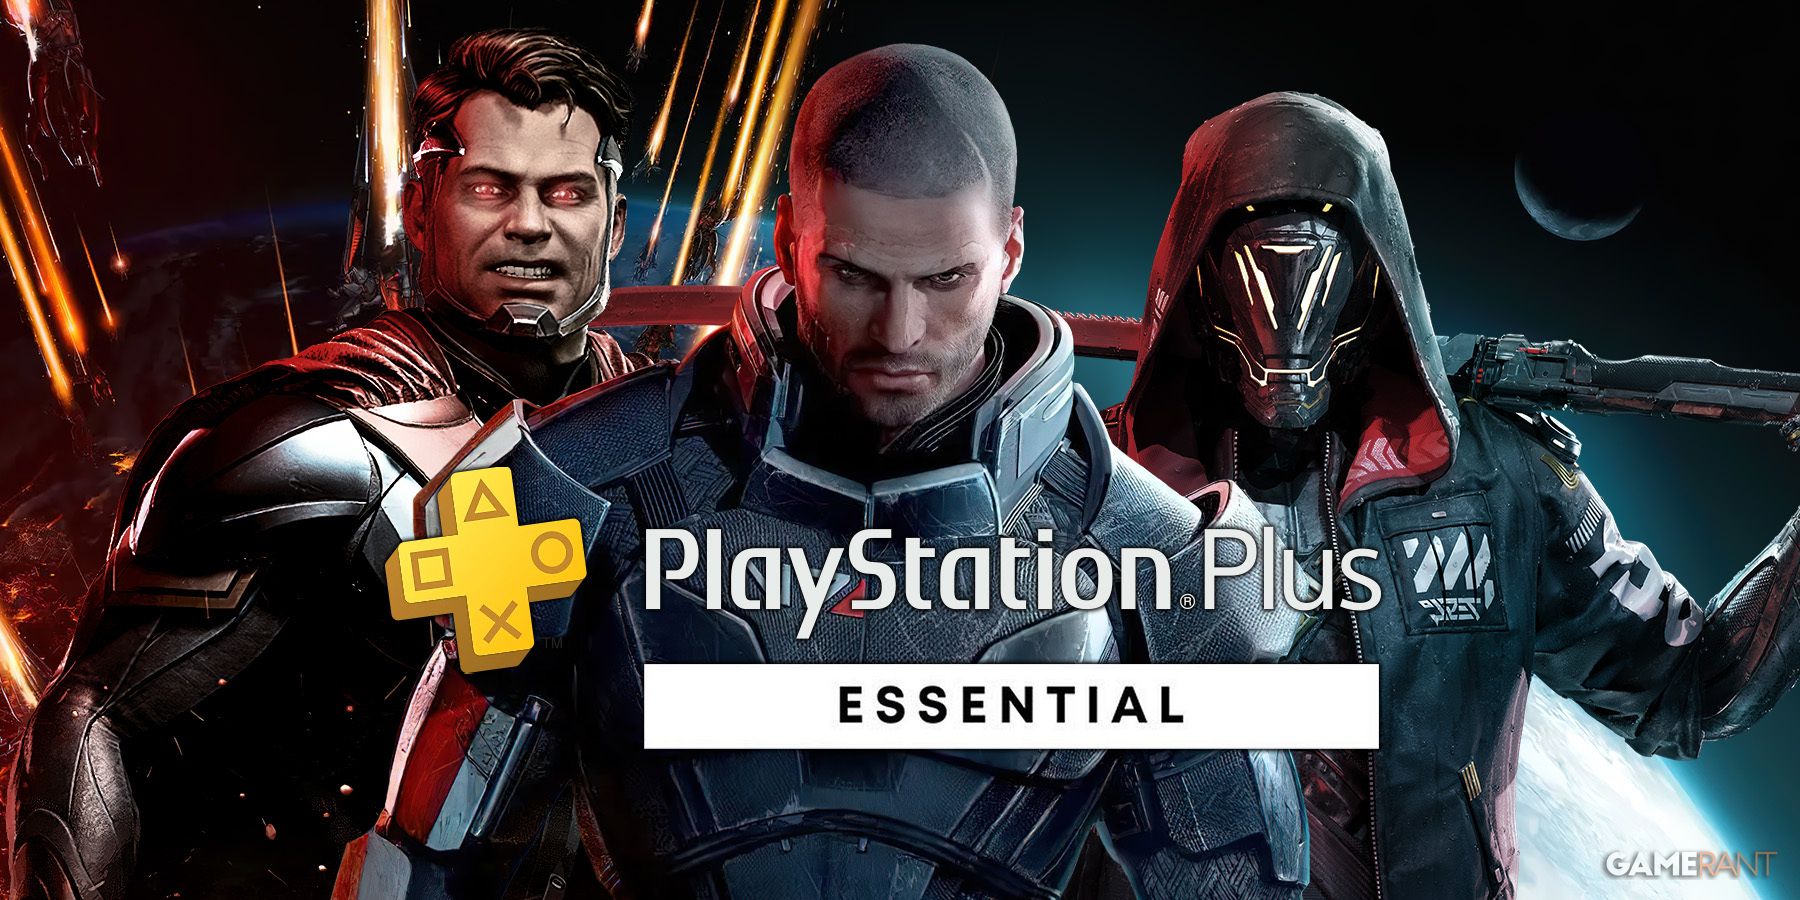 best-games-for-free-on-ps-plus-essential-2022-mass-effect-3-sheperd-ghostrunner-injustice-2-superman-gamerant